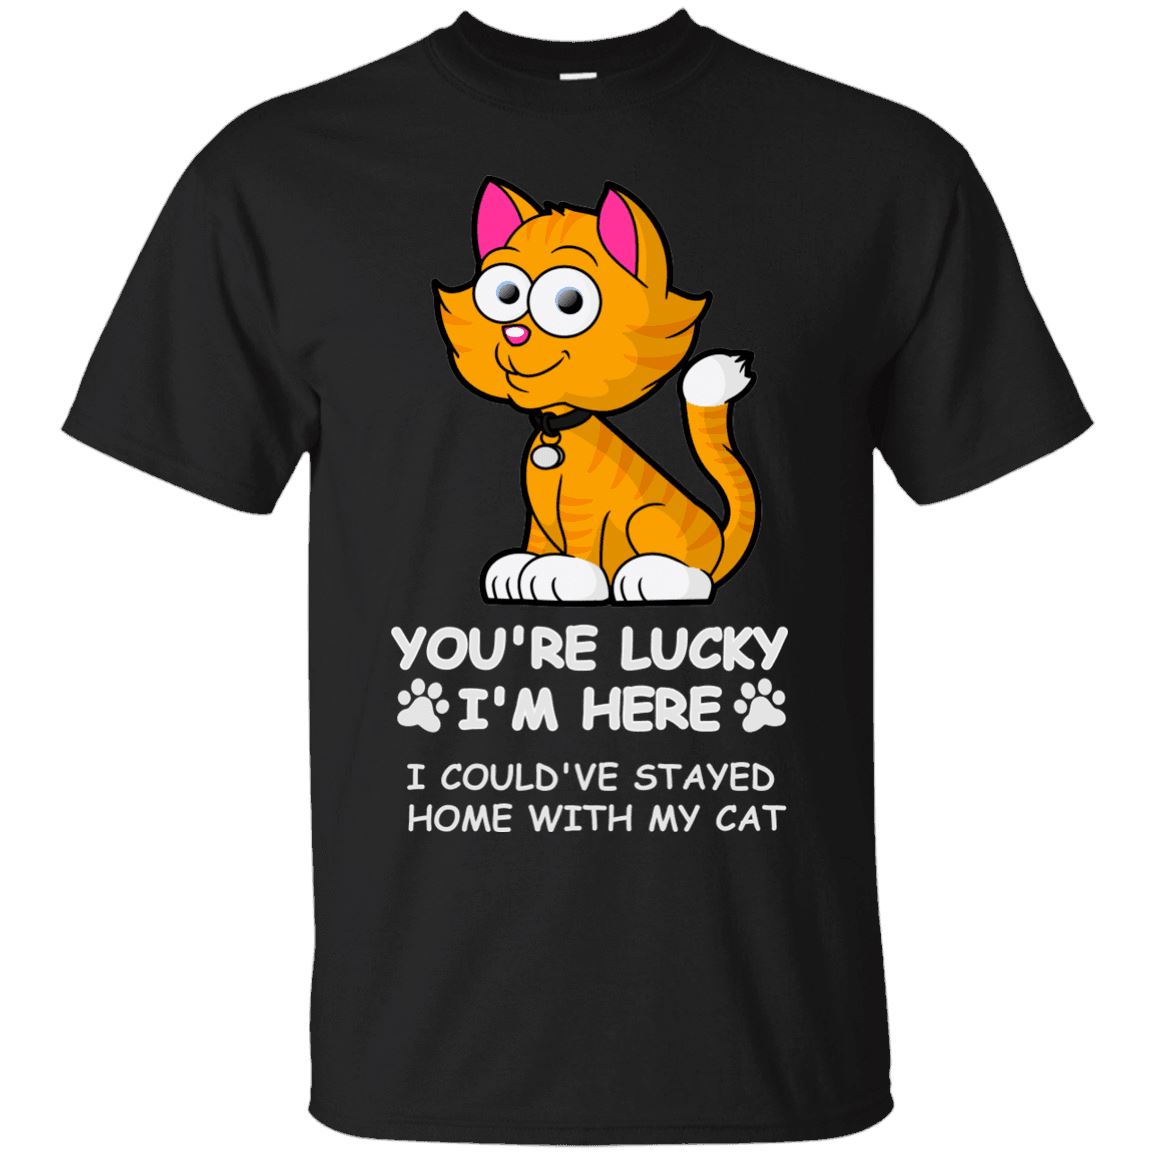 Cat Tee - You're Lucky I'm Here, I Could Have Stay Home With My Cat - CatsForLife